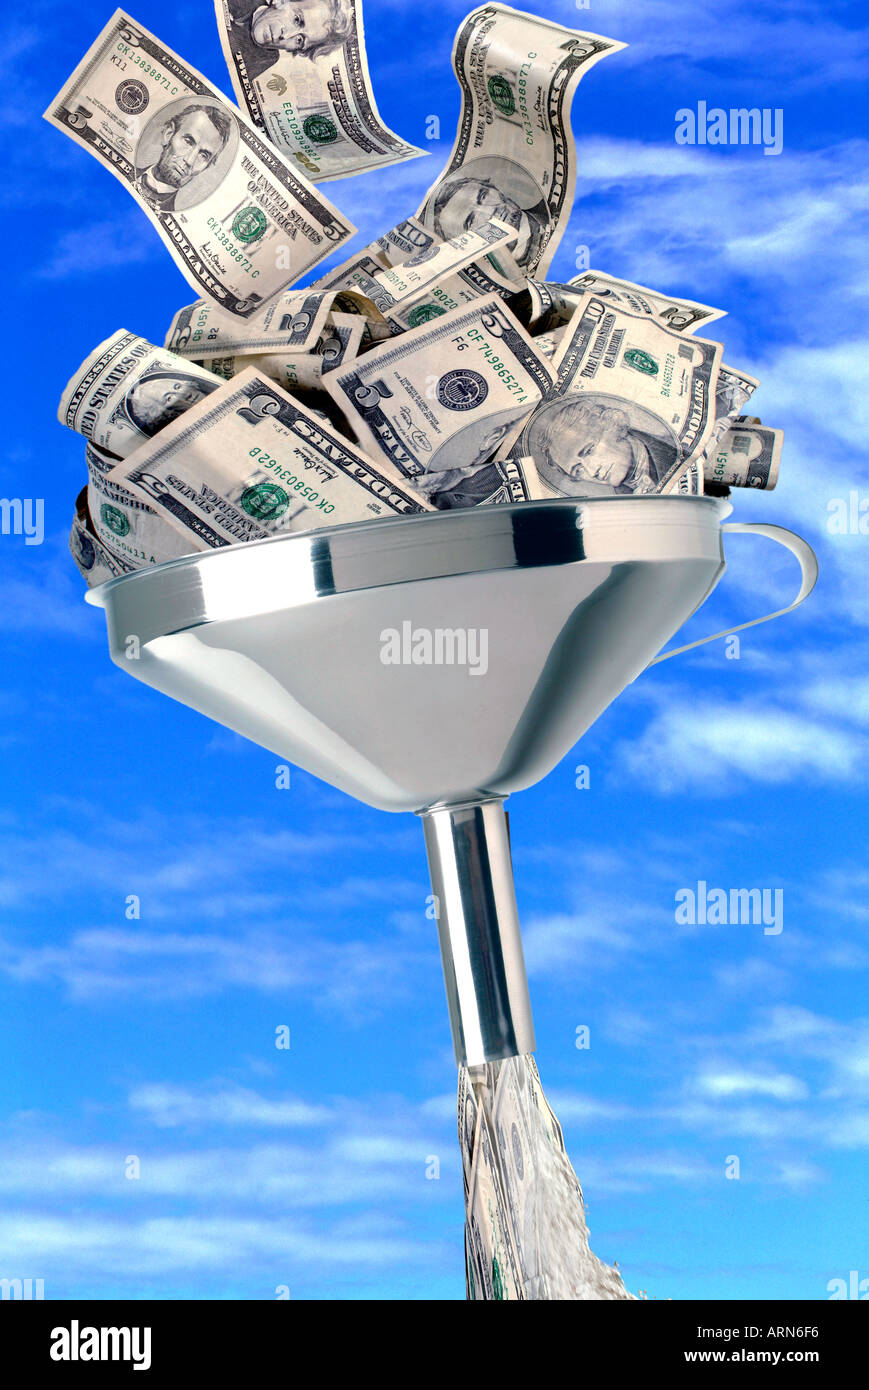 Money flowing through funnel Stock Photo